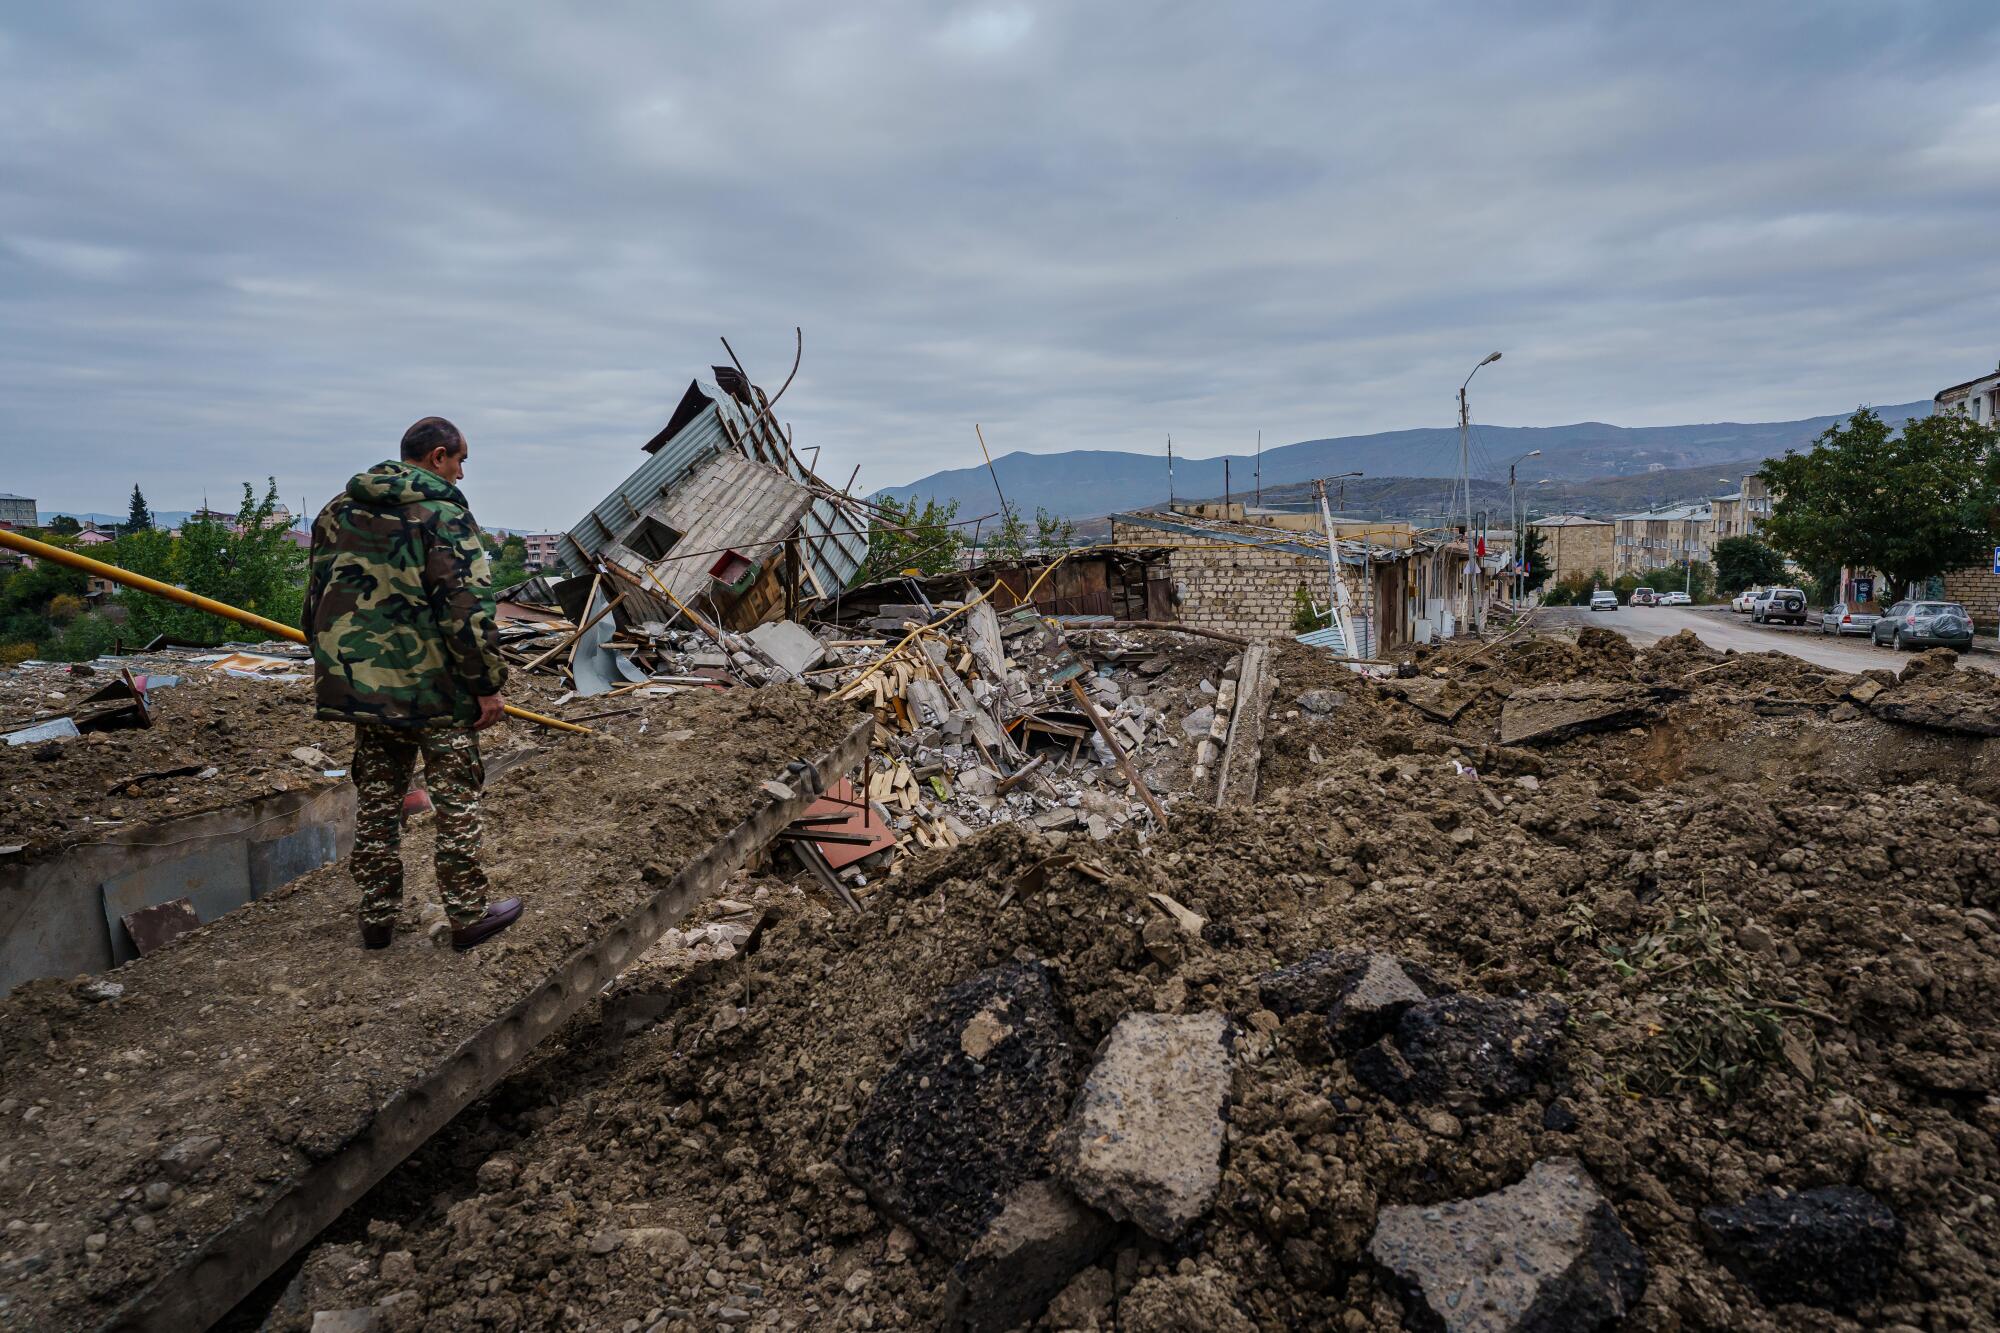 A man looks over a crater blast along a street in front of a residential area in Stepanakert.